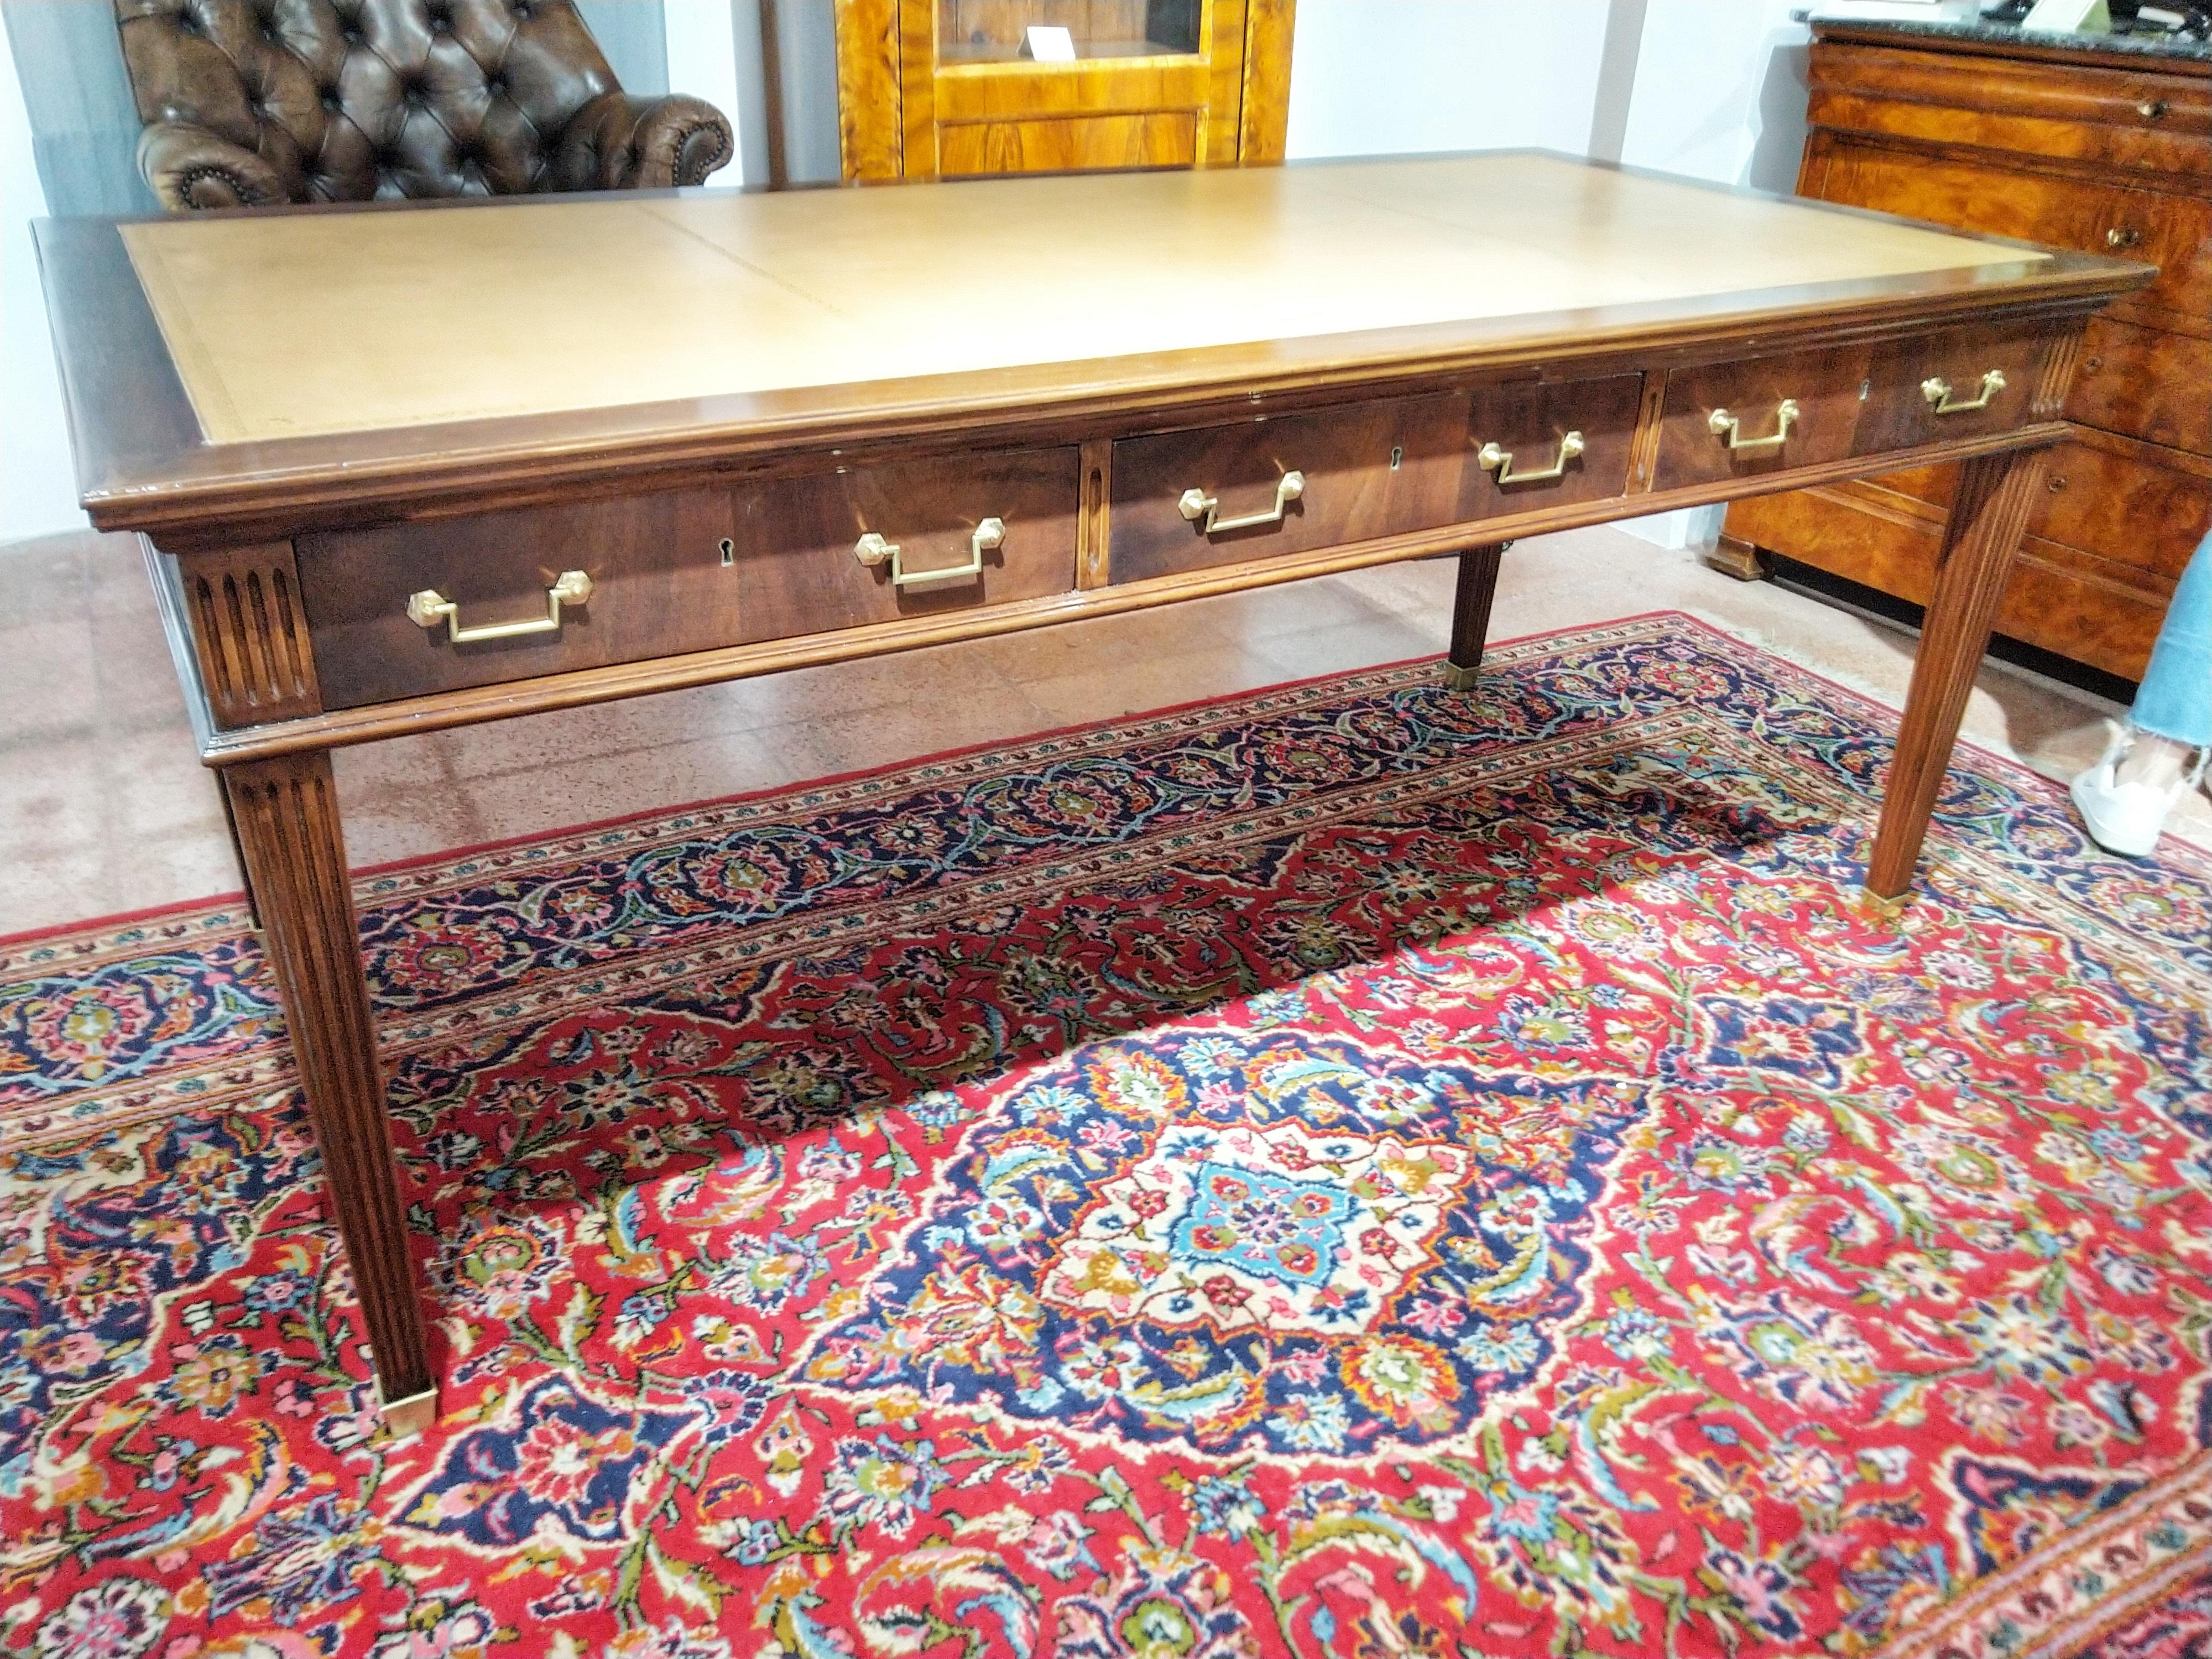 Beautiful Louis XVI style bureau plat writing desk from early 20th century, totally restored. Walnut wood, brass and light brown leather top. With three front drawers and a working key. Ideal for a large office.

Louis XVI style, also called Louis